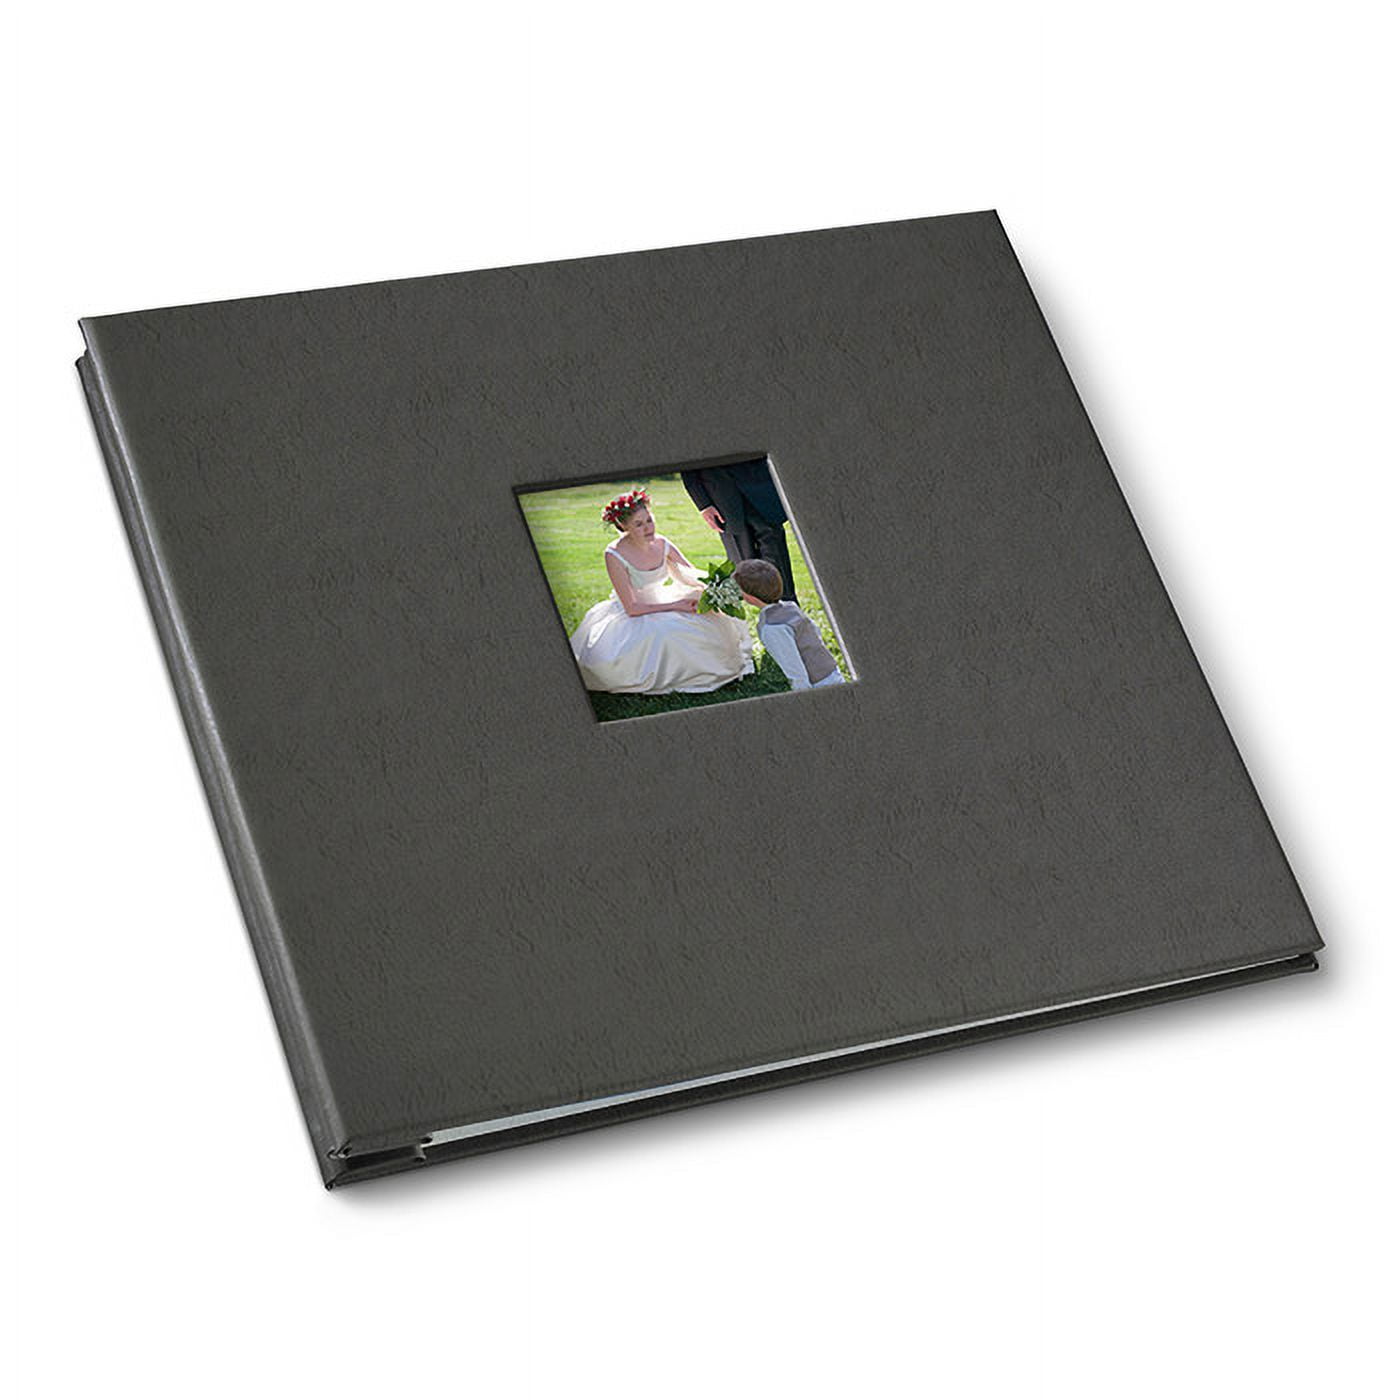 Leather Compact Photo Album (with window)